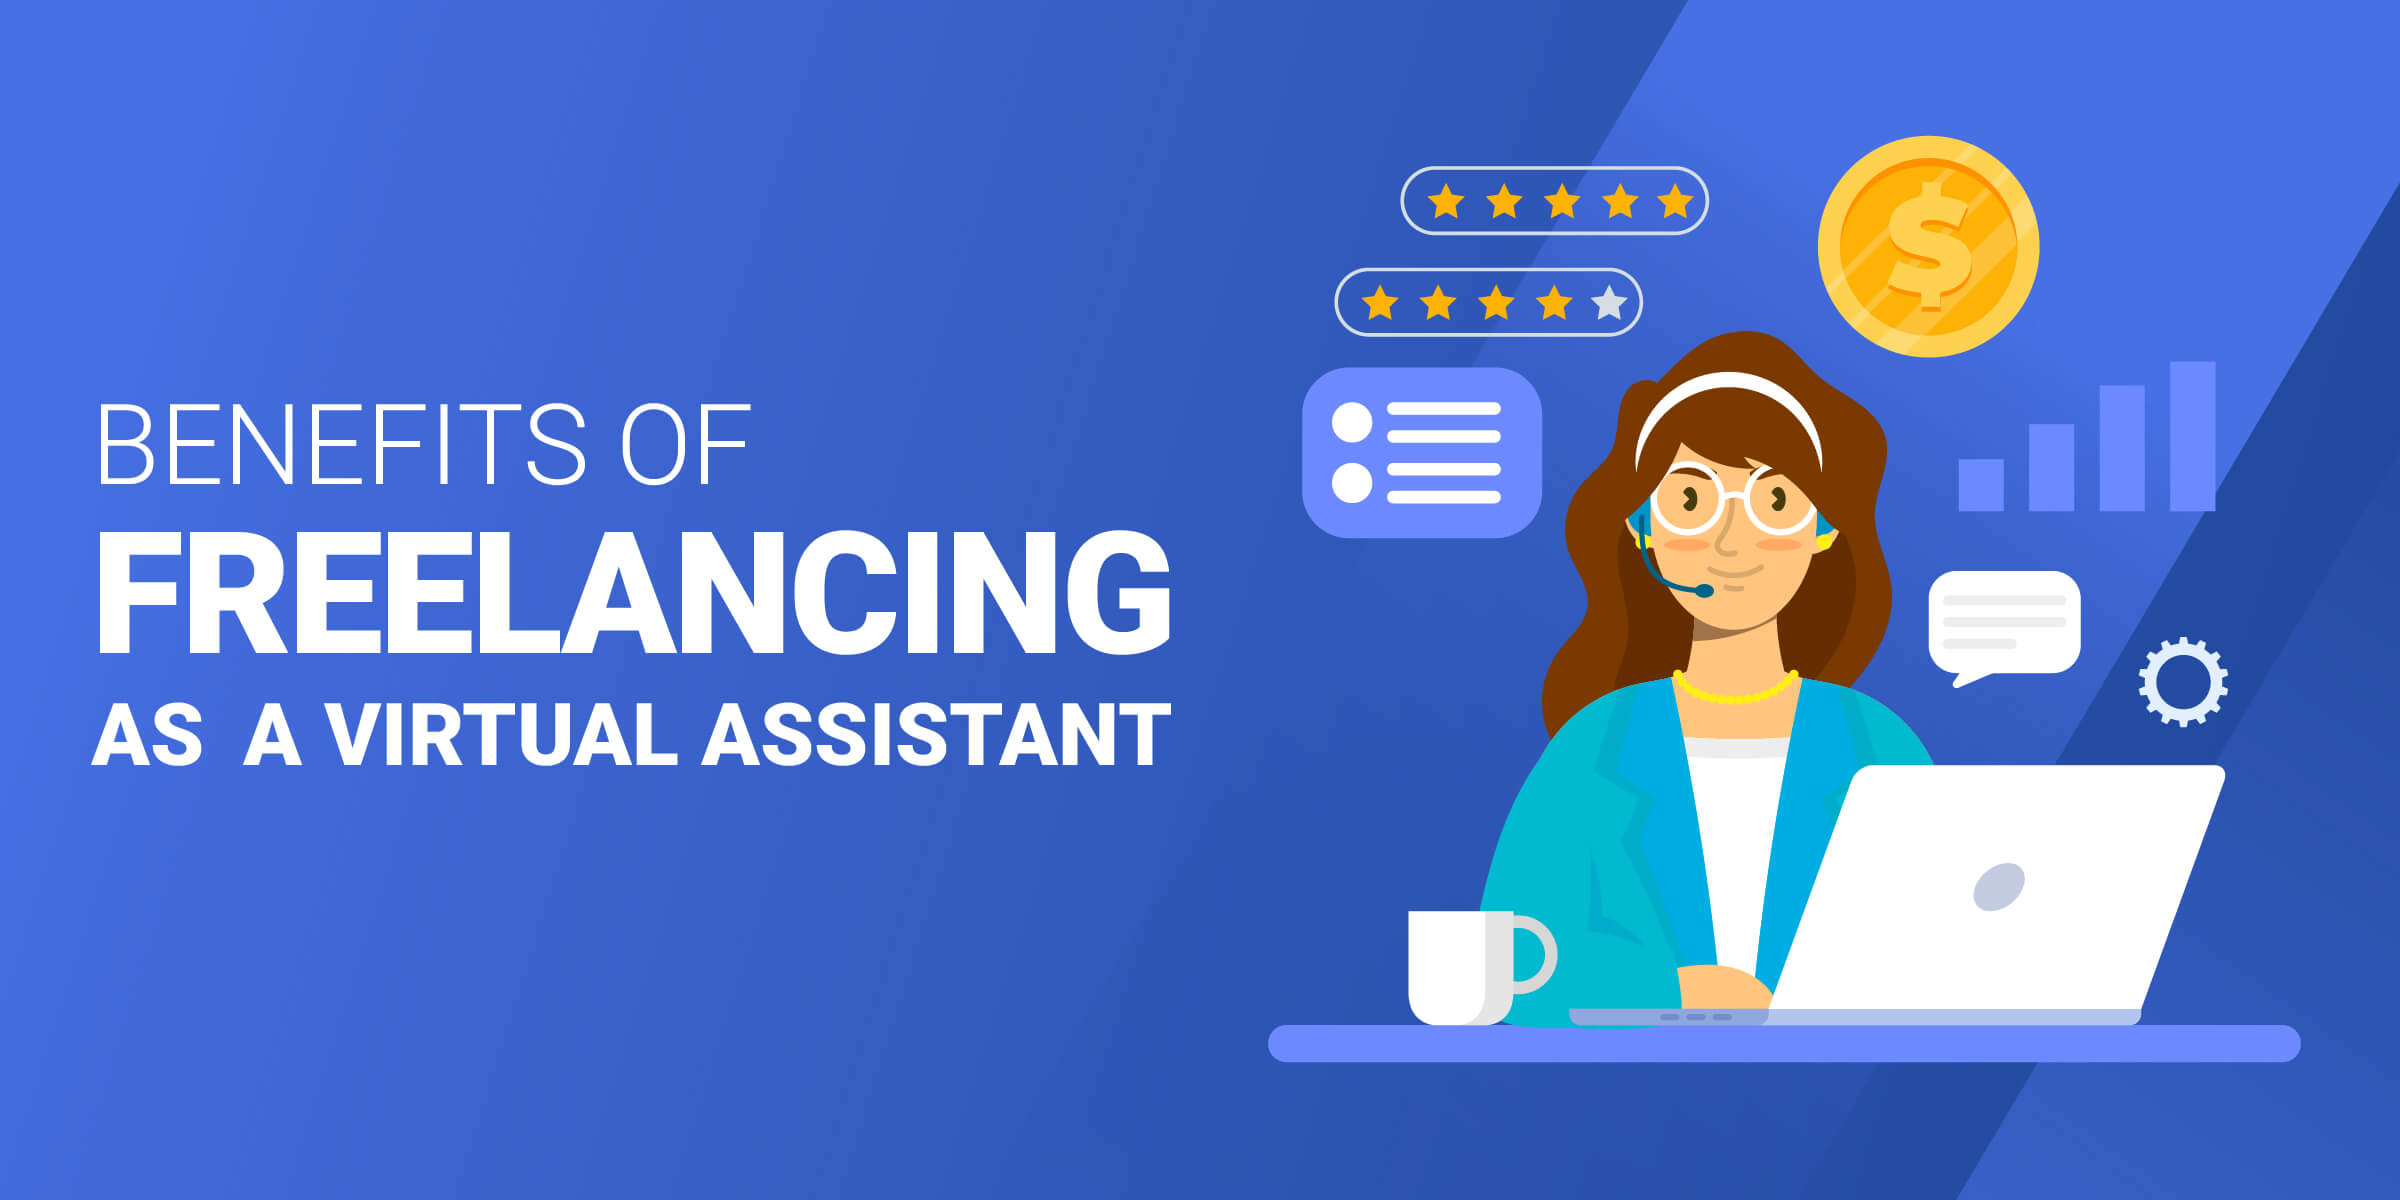 Benefits of Freelancing as Virtual Assistant